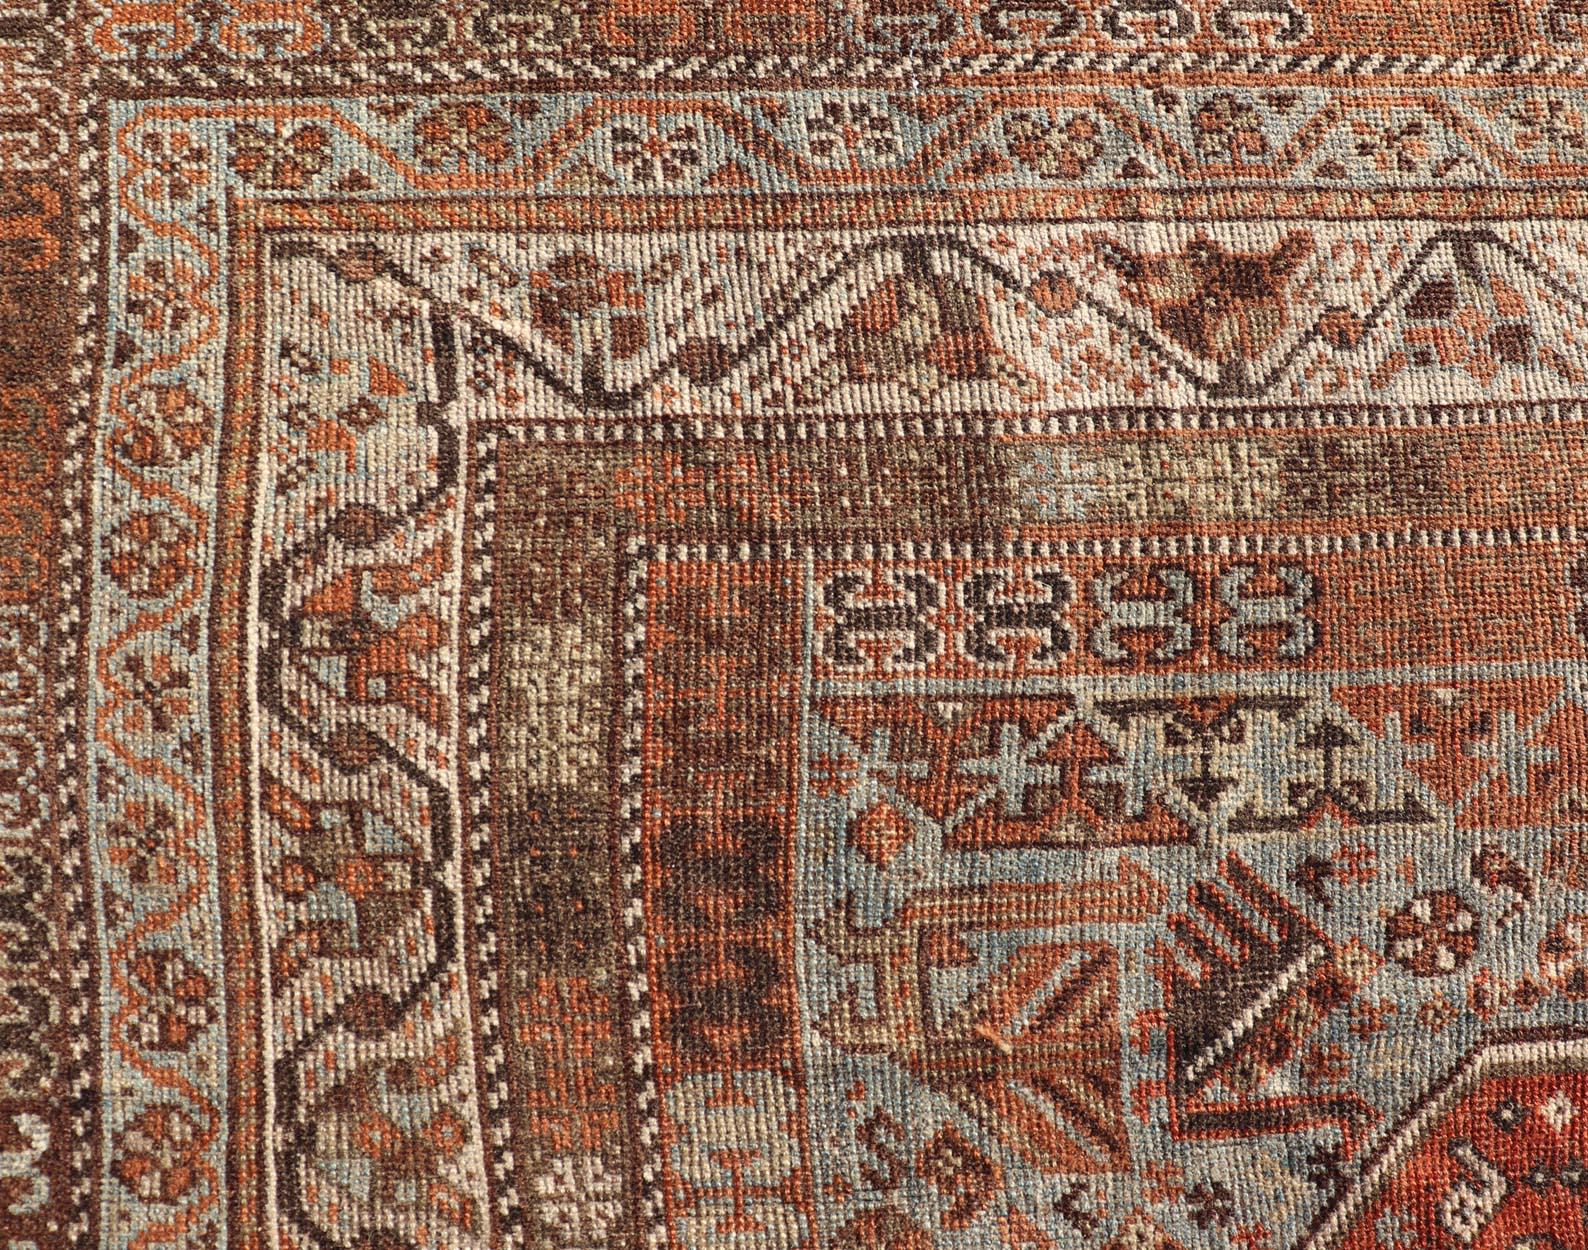 Tribal Antique Persian Shiraz Rug With Medallions Geometric in Rusty Orange, Steel Blue For Sale